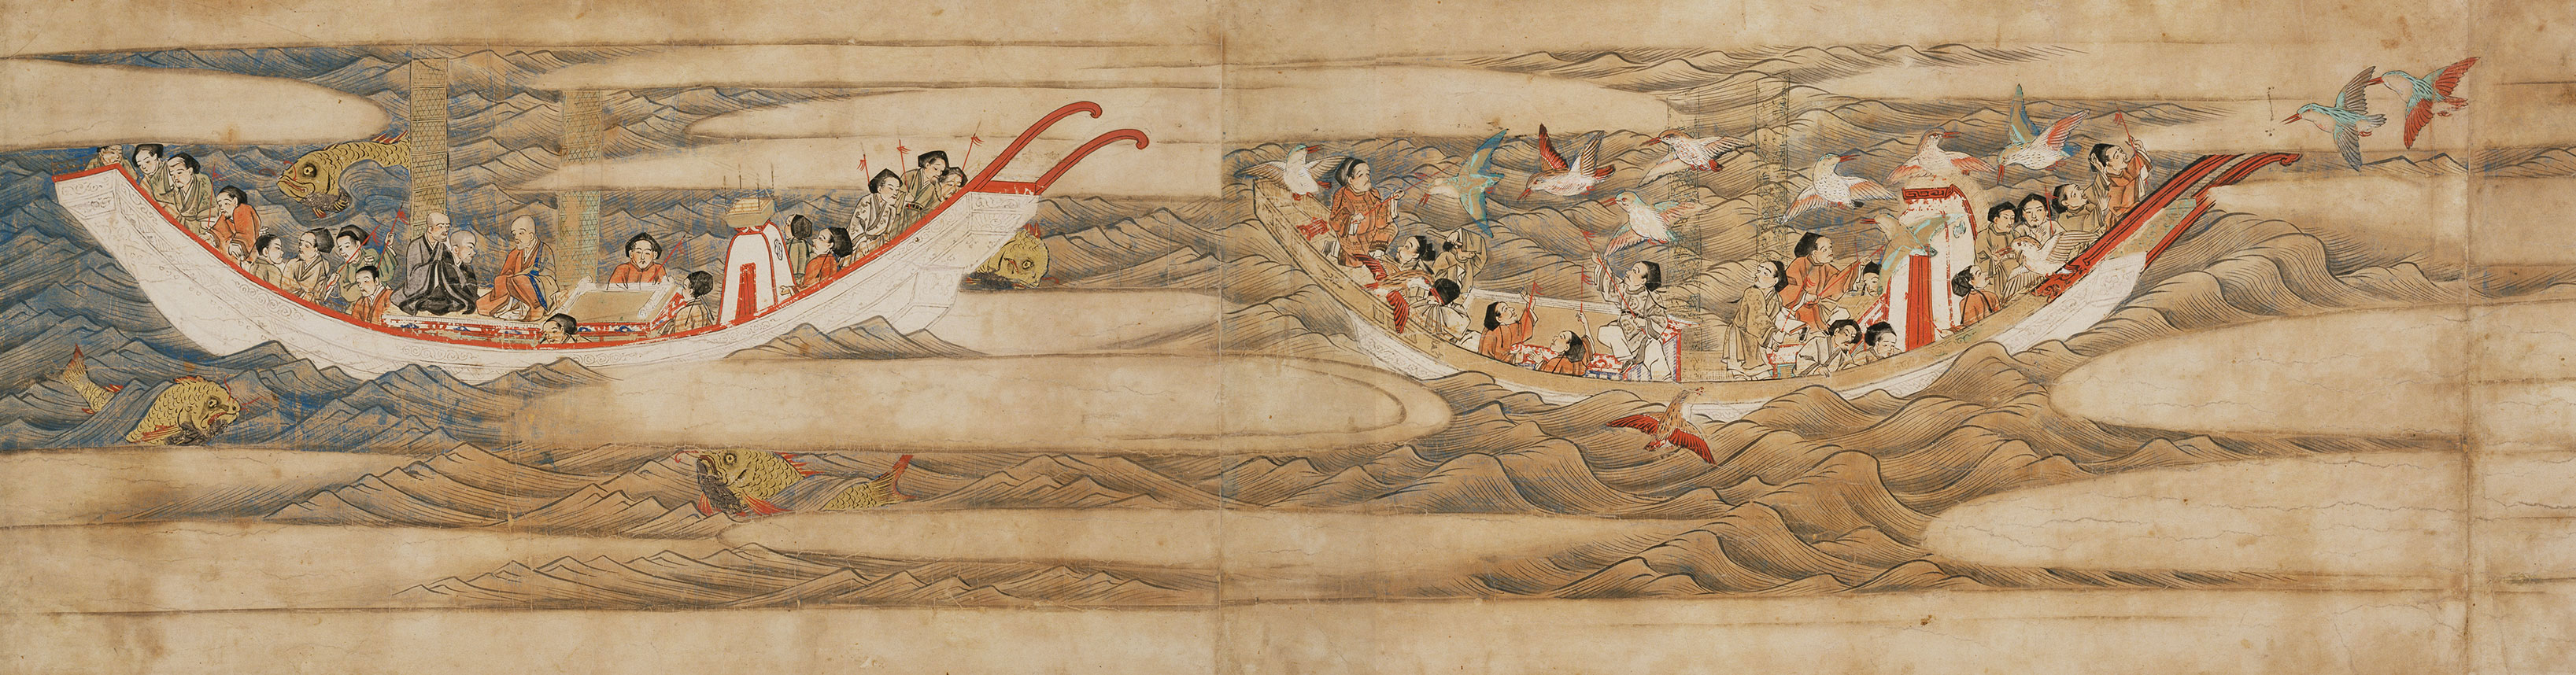 Important Cultural Property Toseiden emaki (Illustrated Scrolls of Ganjin-Wajo’s expedition to Japan), Volume 3